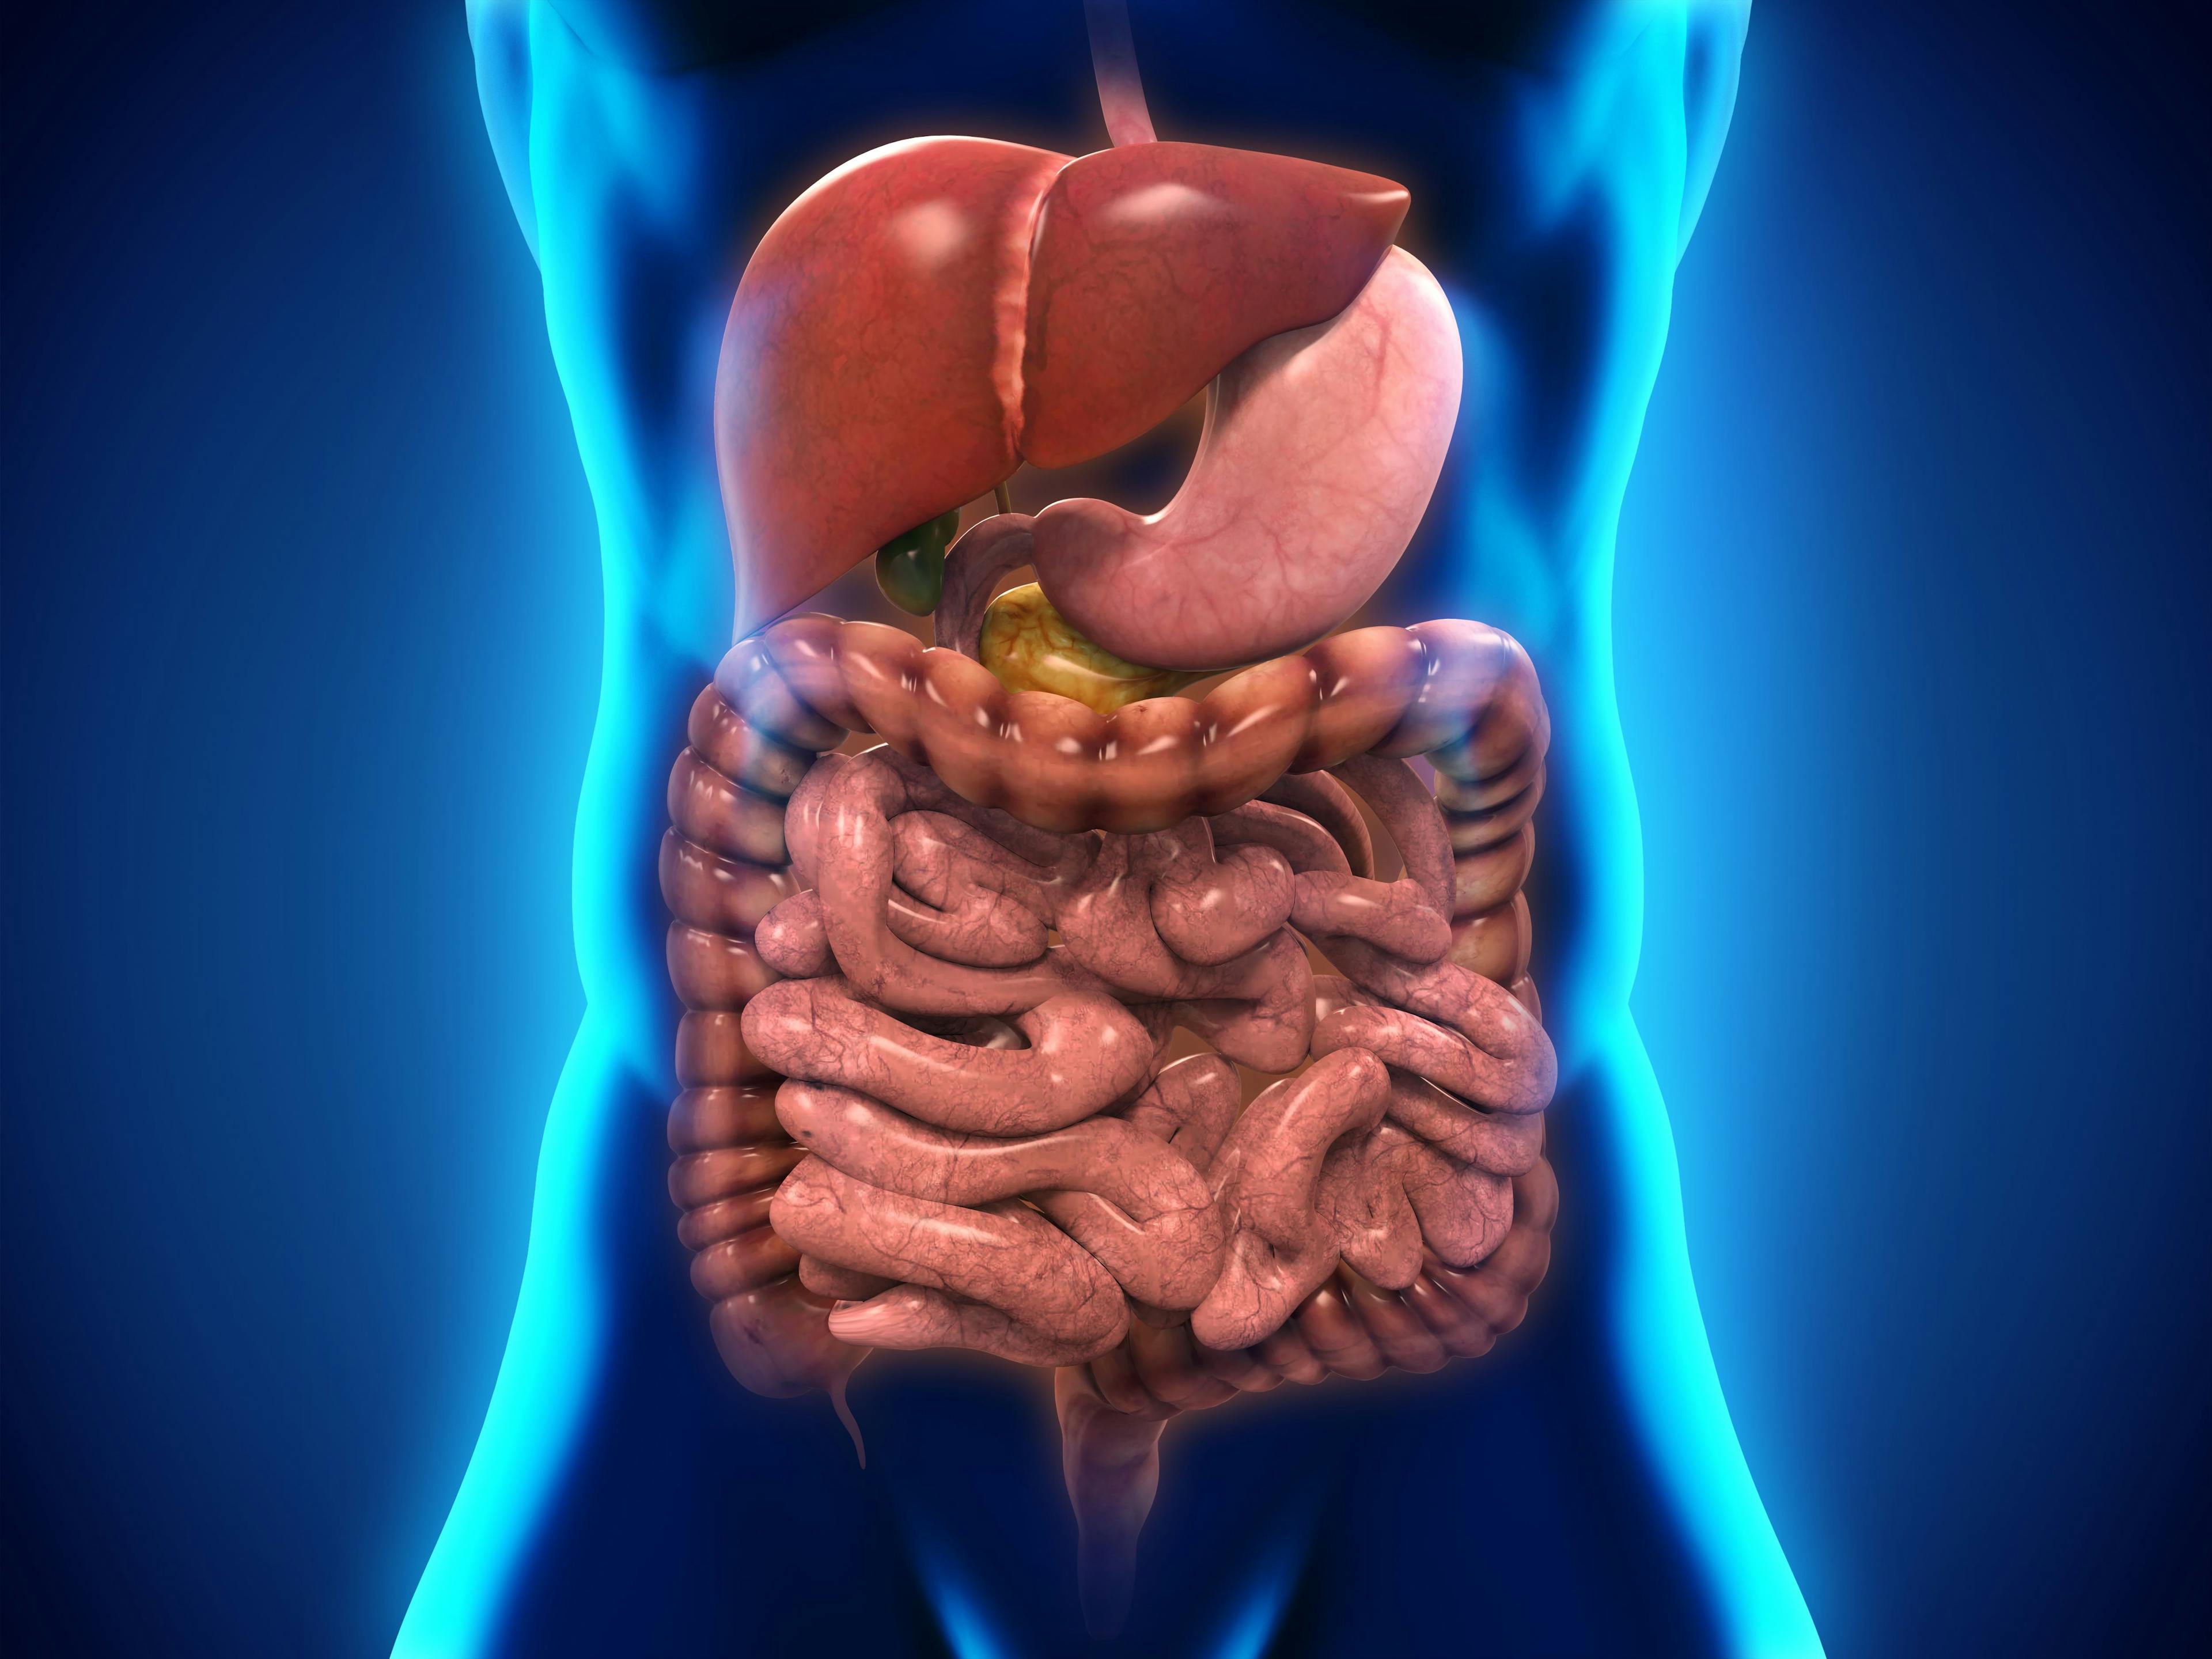 Study: Healthy Gut Microbiome Responsible for Mucus Layer in the Colon